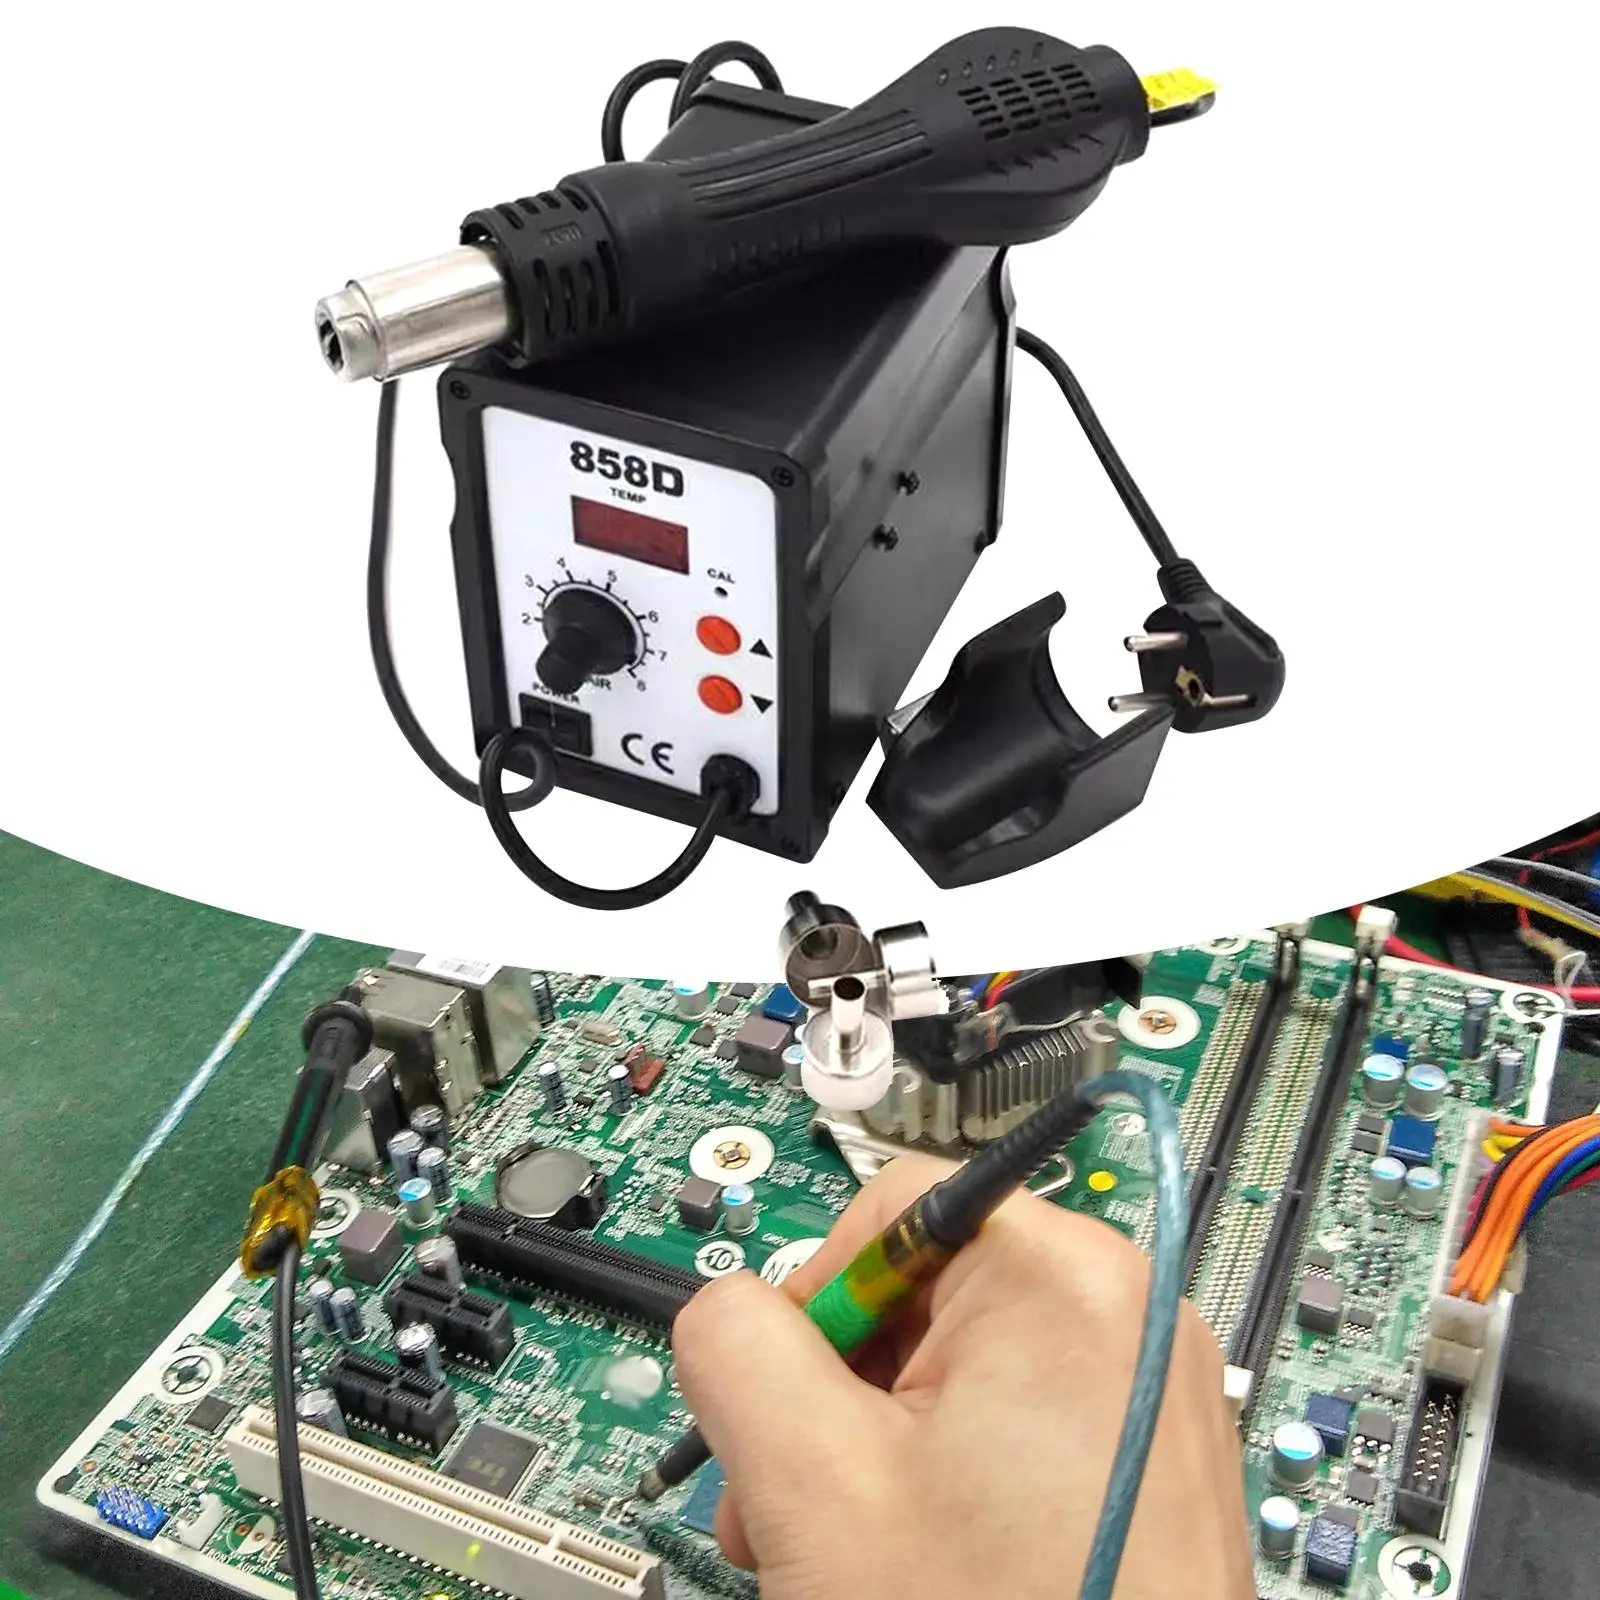 Digital Soldering Station Portable Replacing Nozzle Automatic Cooling 858D Hot Air Reworks Station for Circuit Boards Laptop